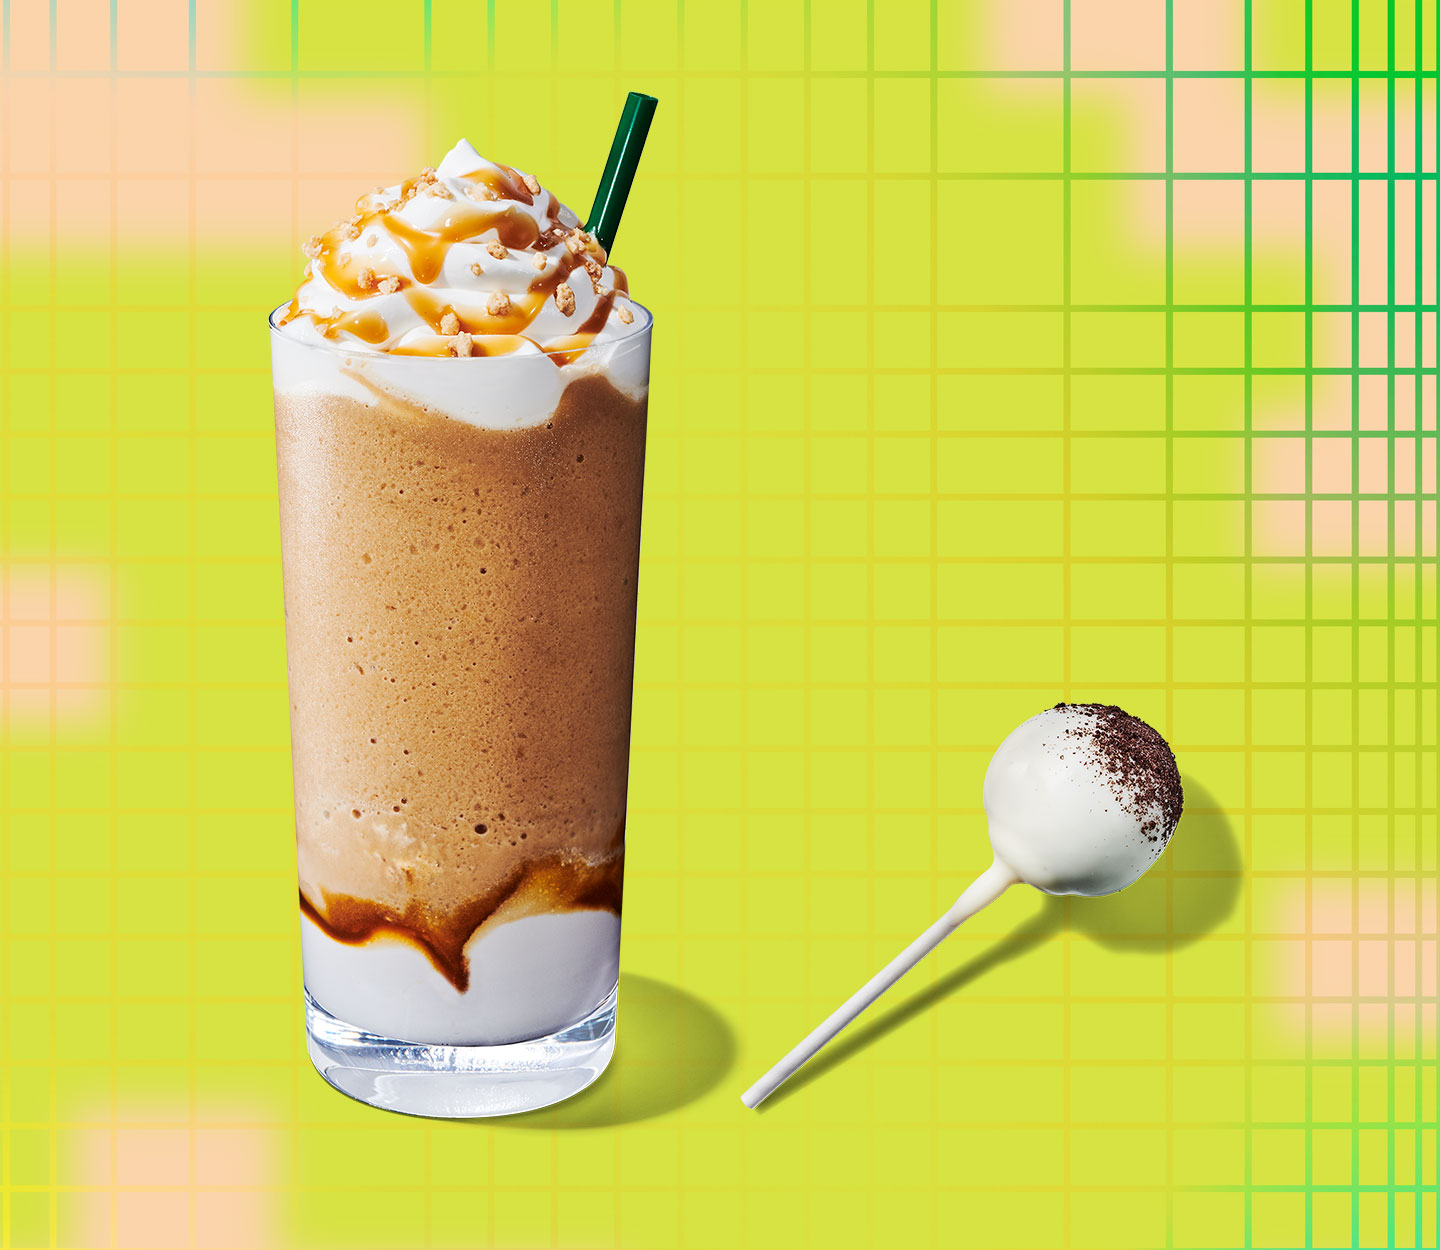 A chocolaty blended drink with whipped cream and a straw next to a white-frosted cake pop laying on its side.